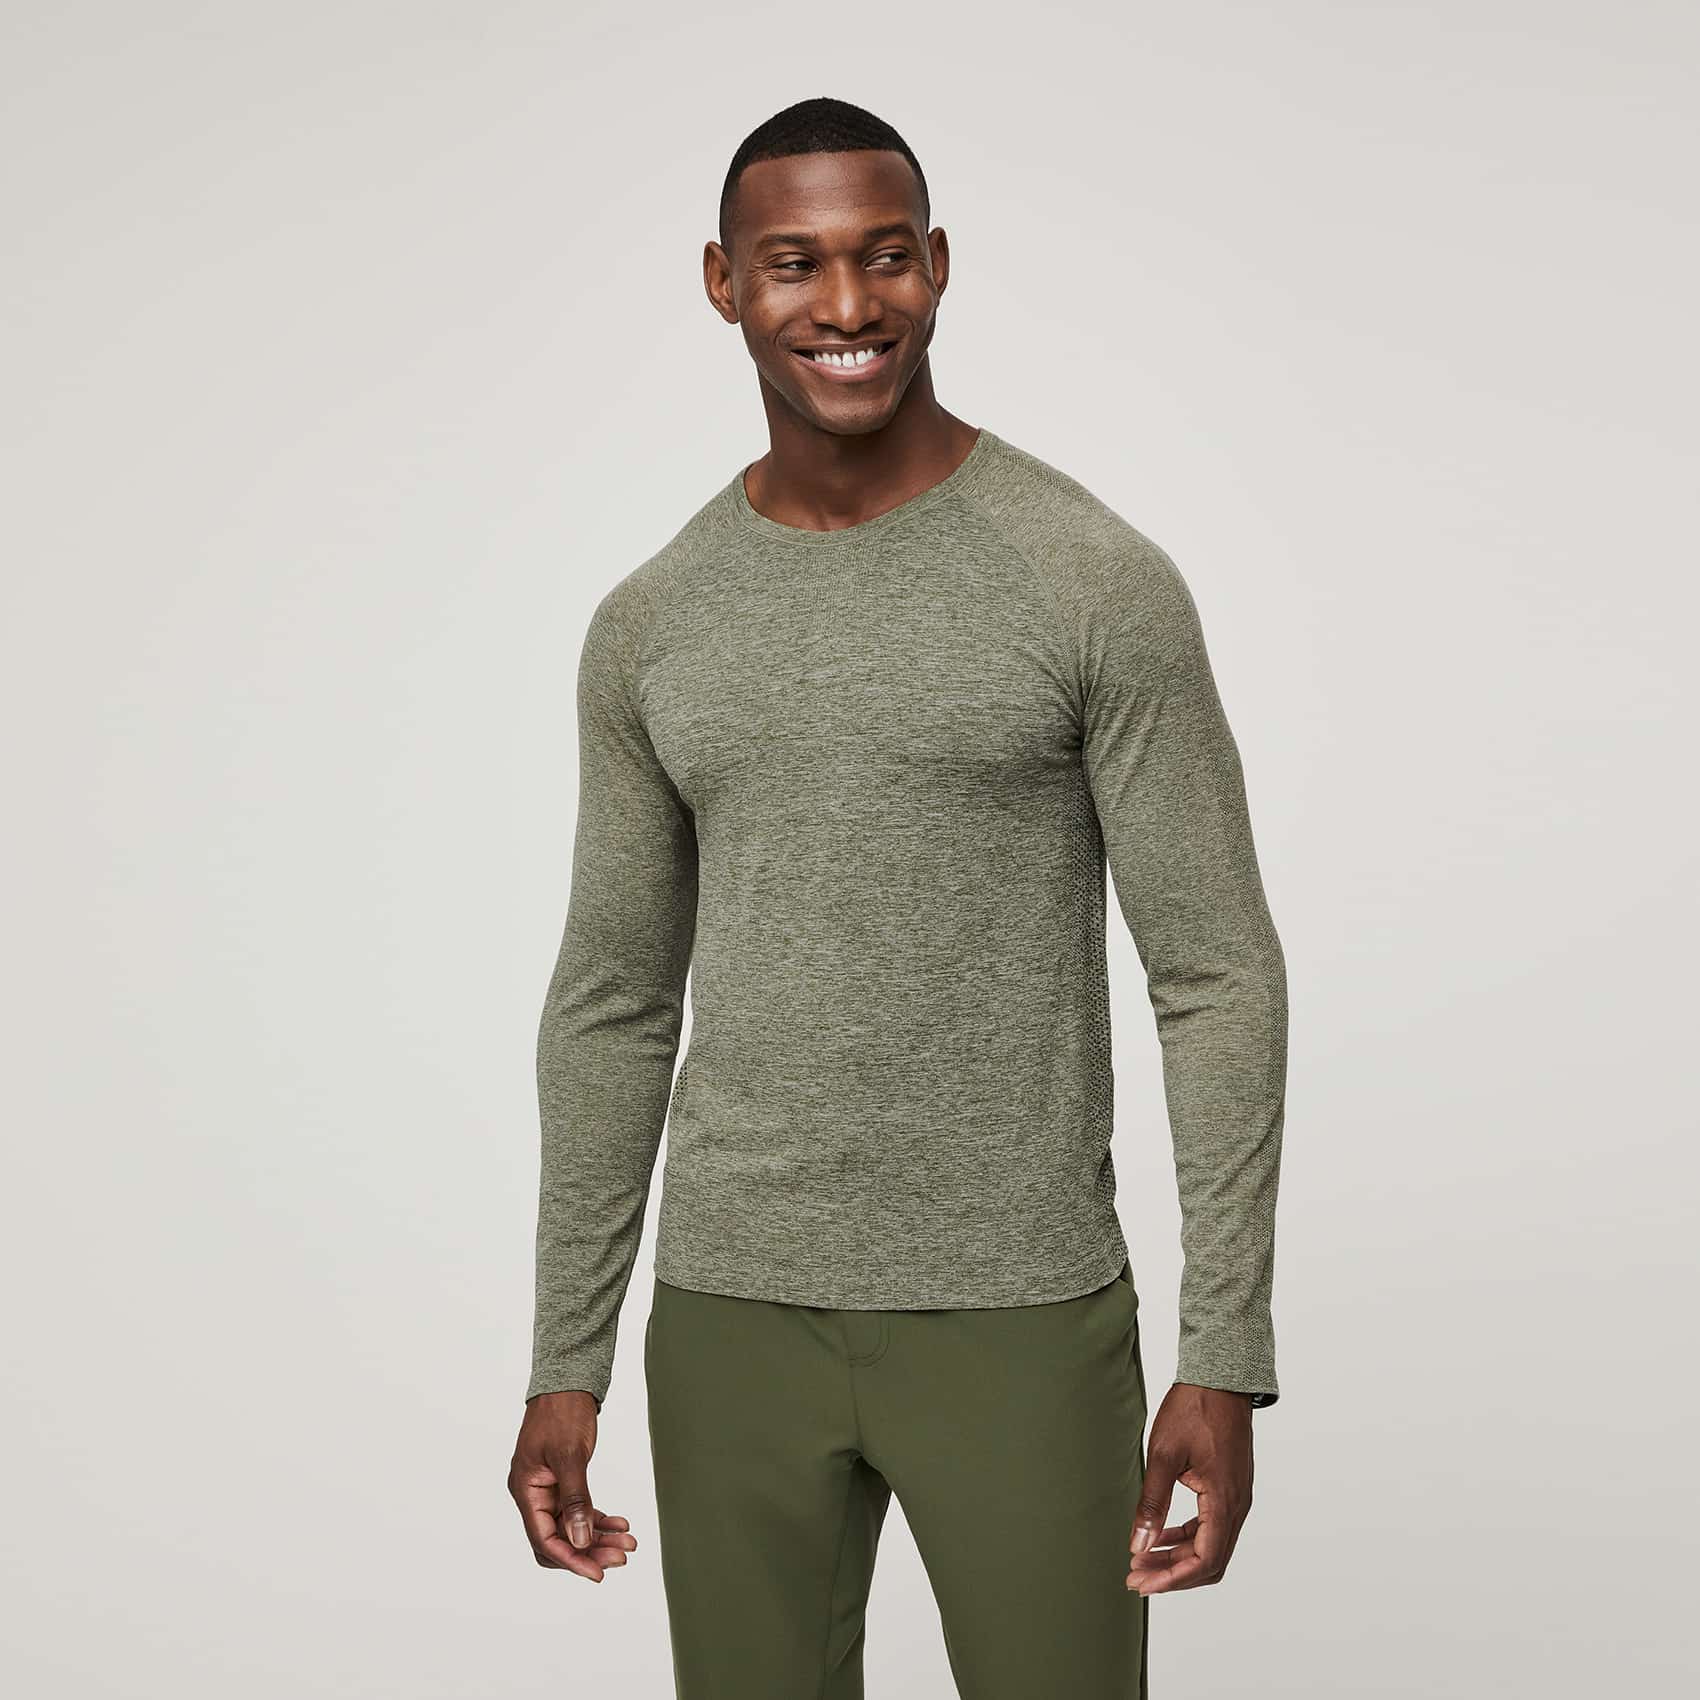 https://www.wearfigs.com/i/shopify/s/files/1/0139/8942/products/Men-Makato-Perf-US_Heathered-Dark-Olive-1.jpg?v=1633730321